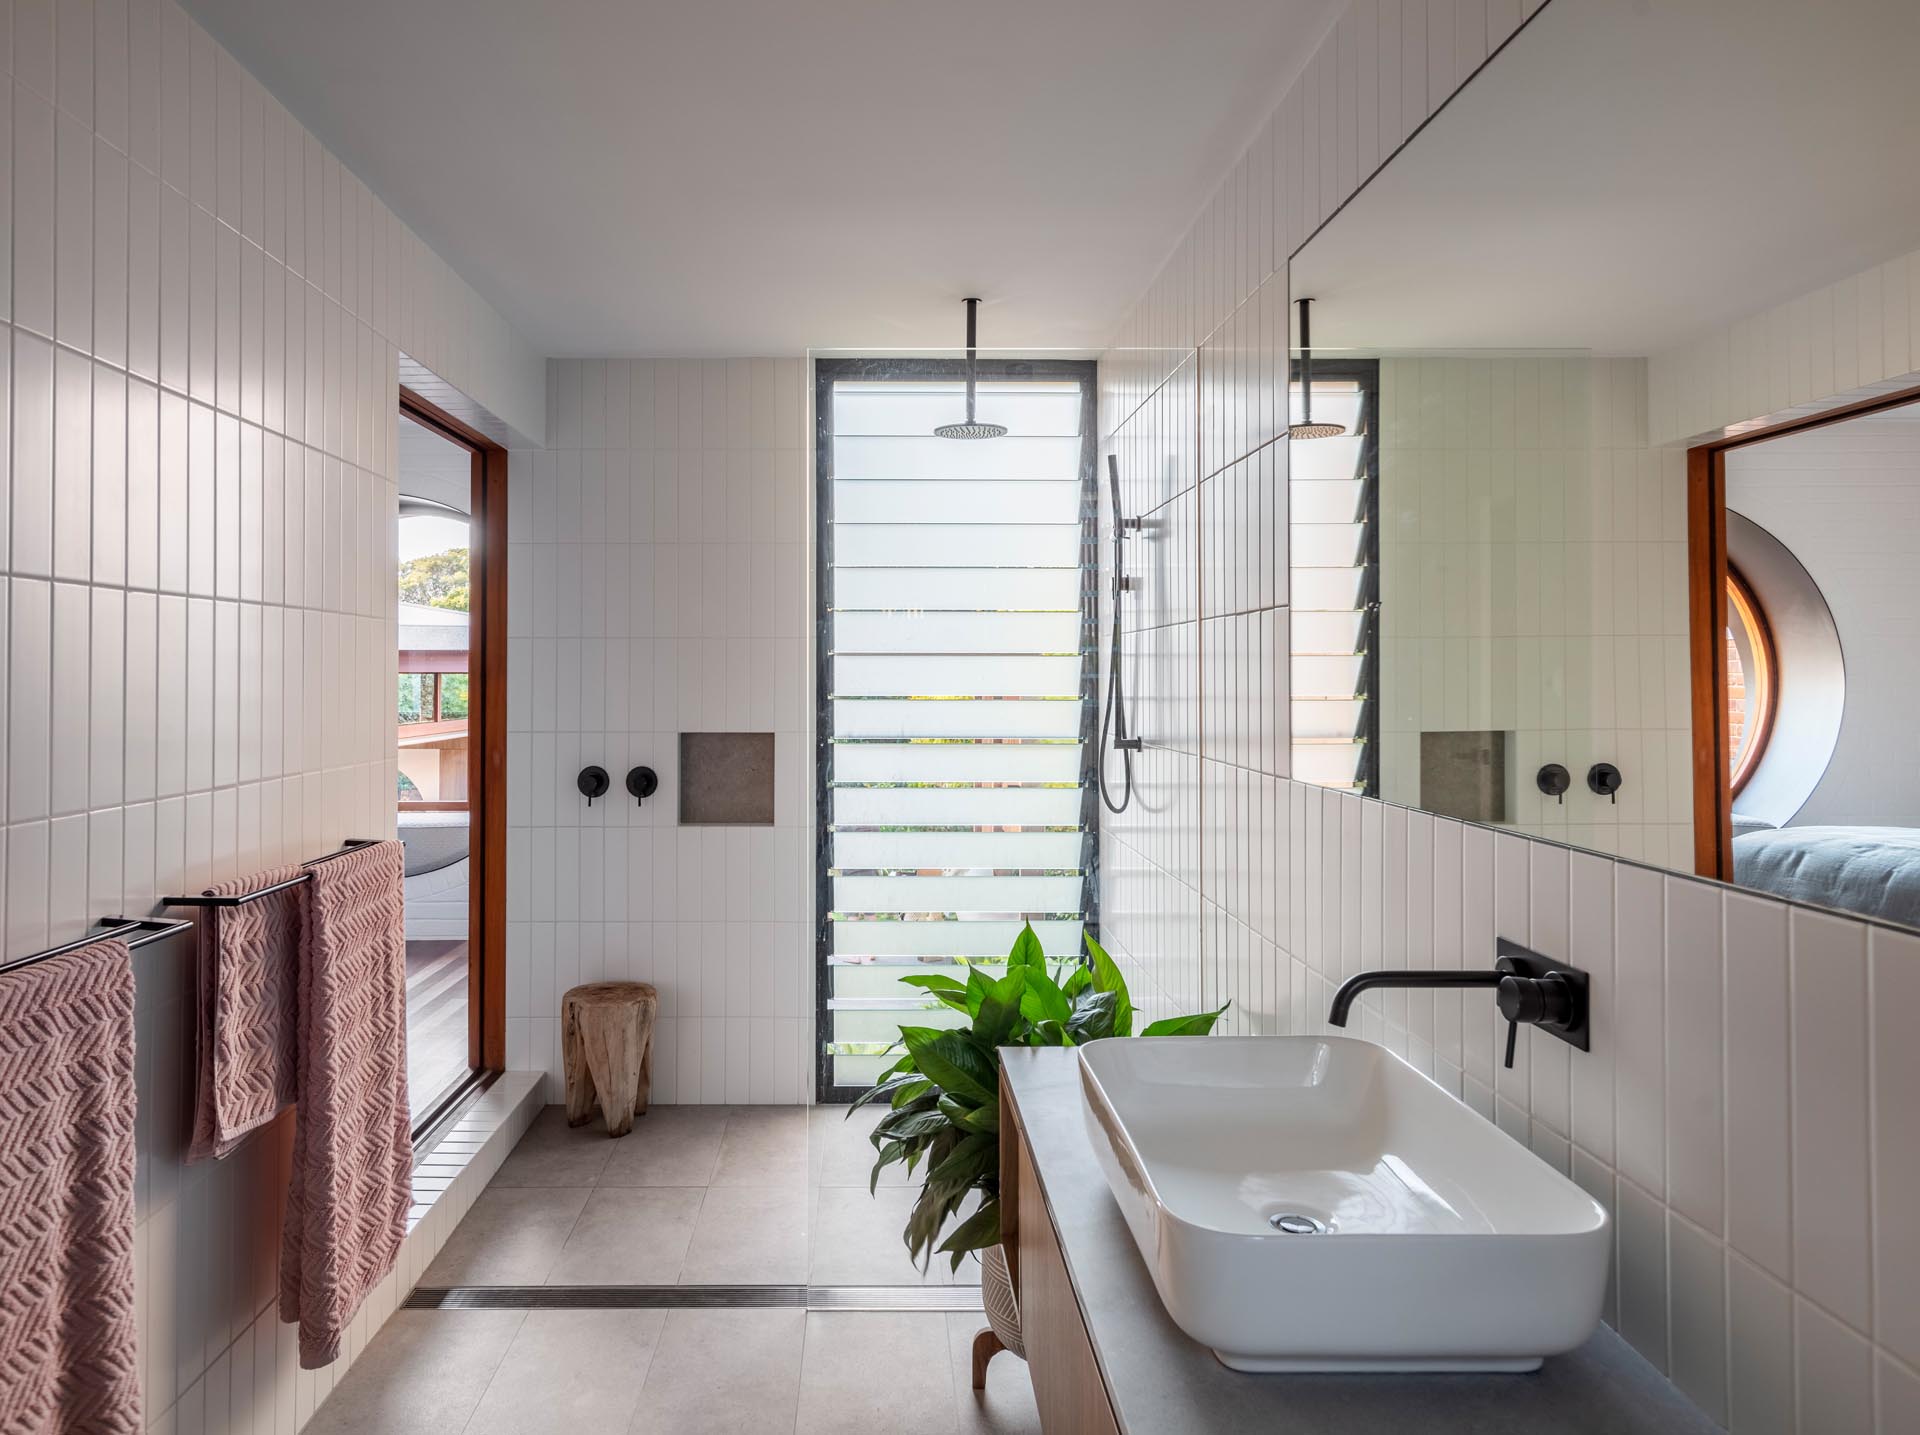 A modern bathroom with white rectangular tiles and a louver window in the shower.